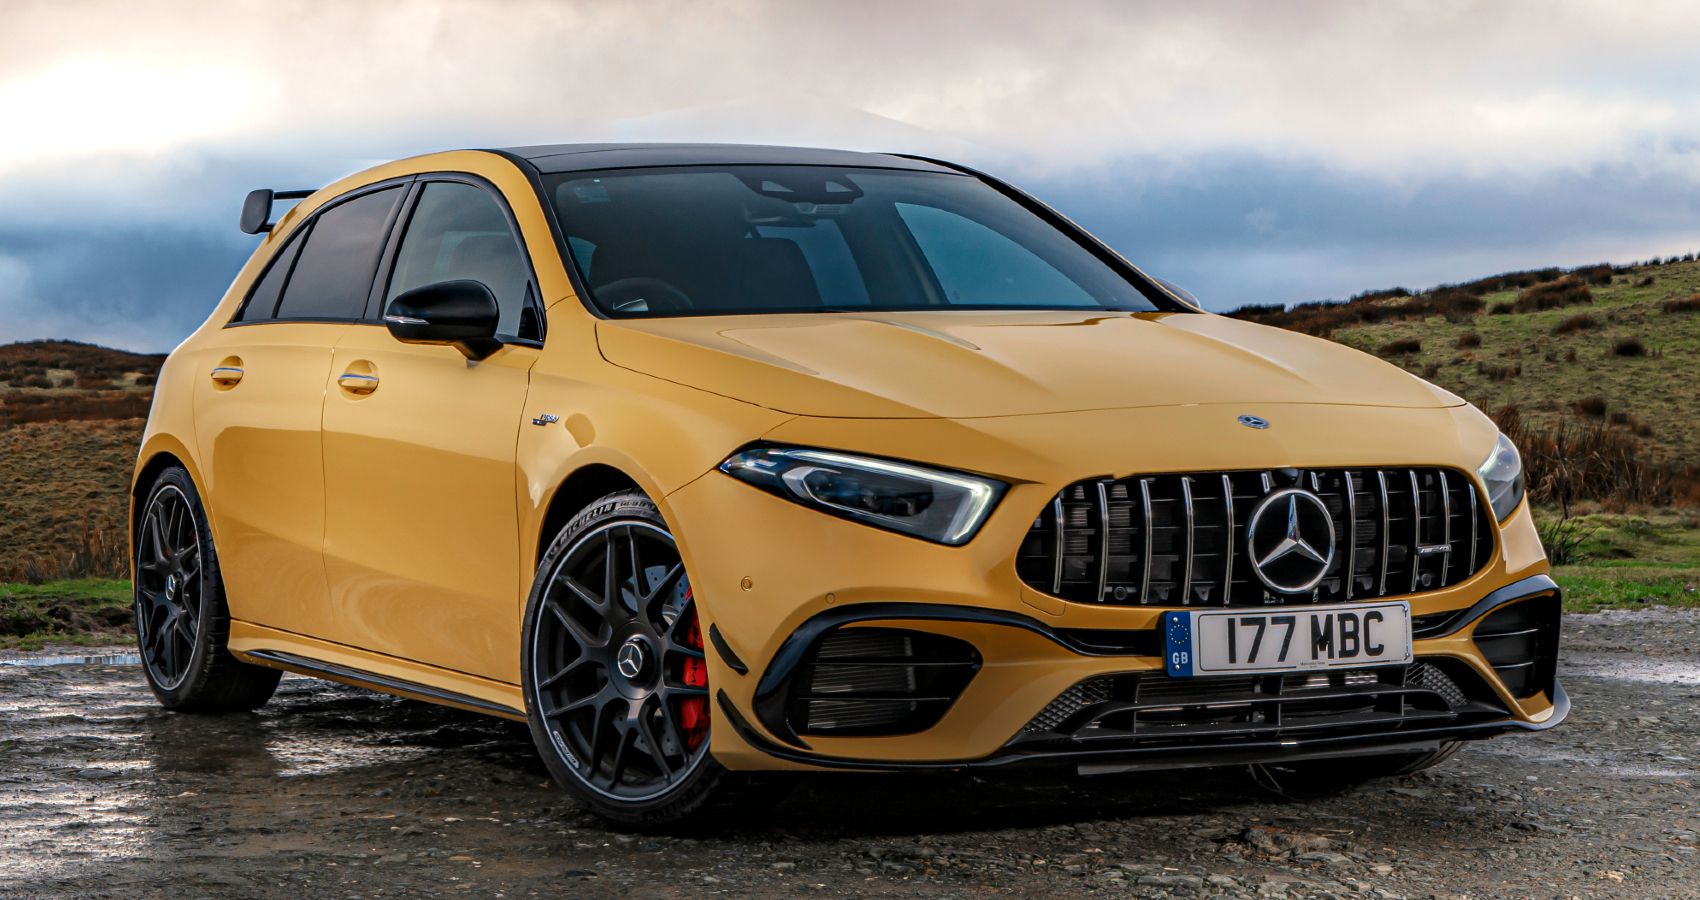 Mercedes AMG A45 S exterior yellow